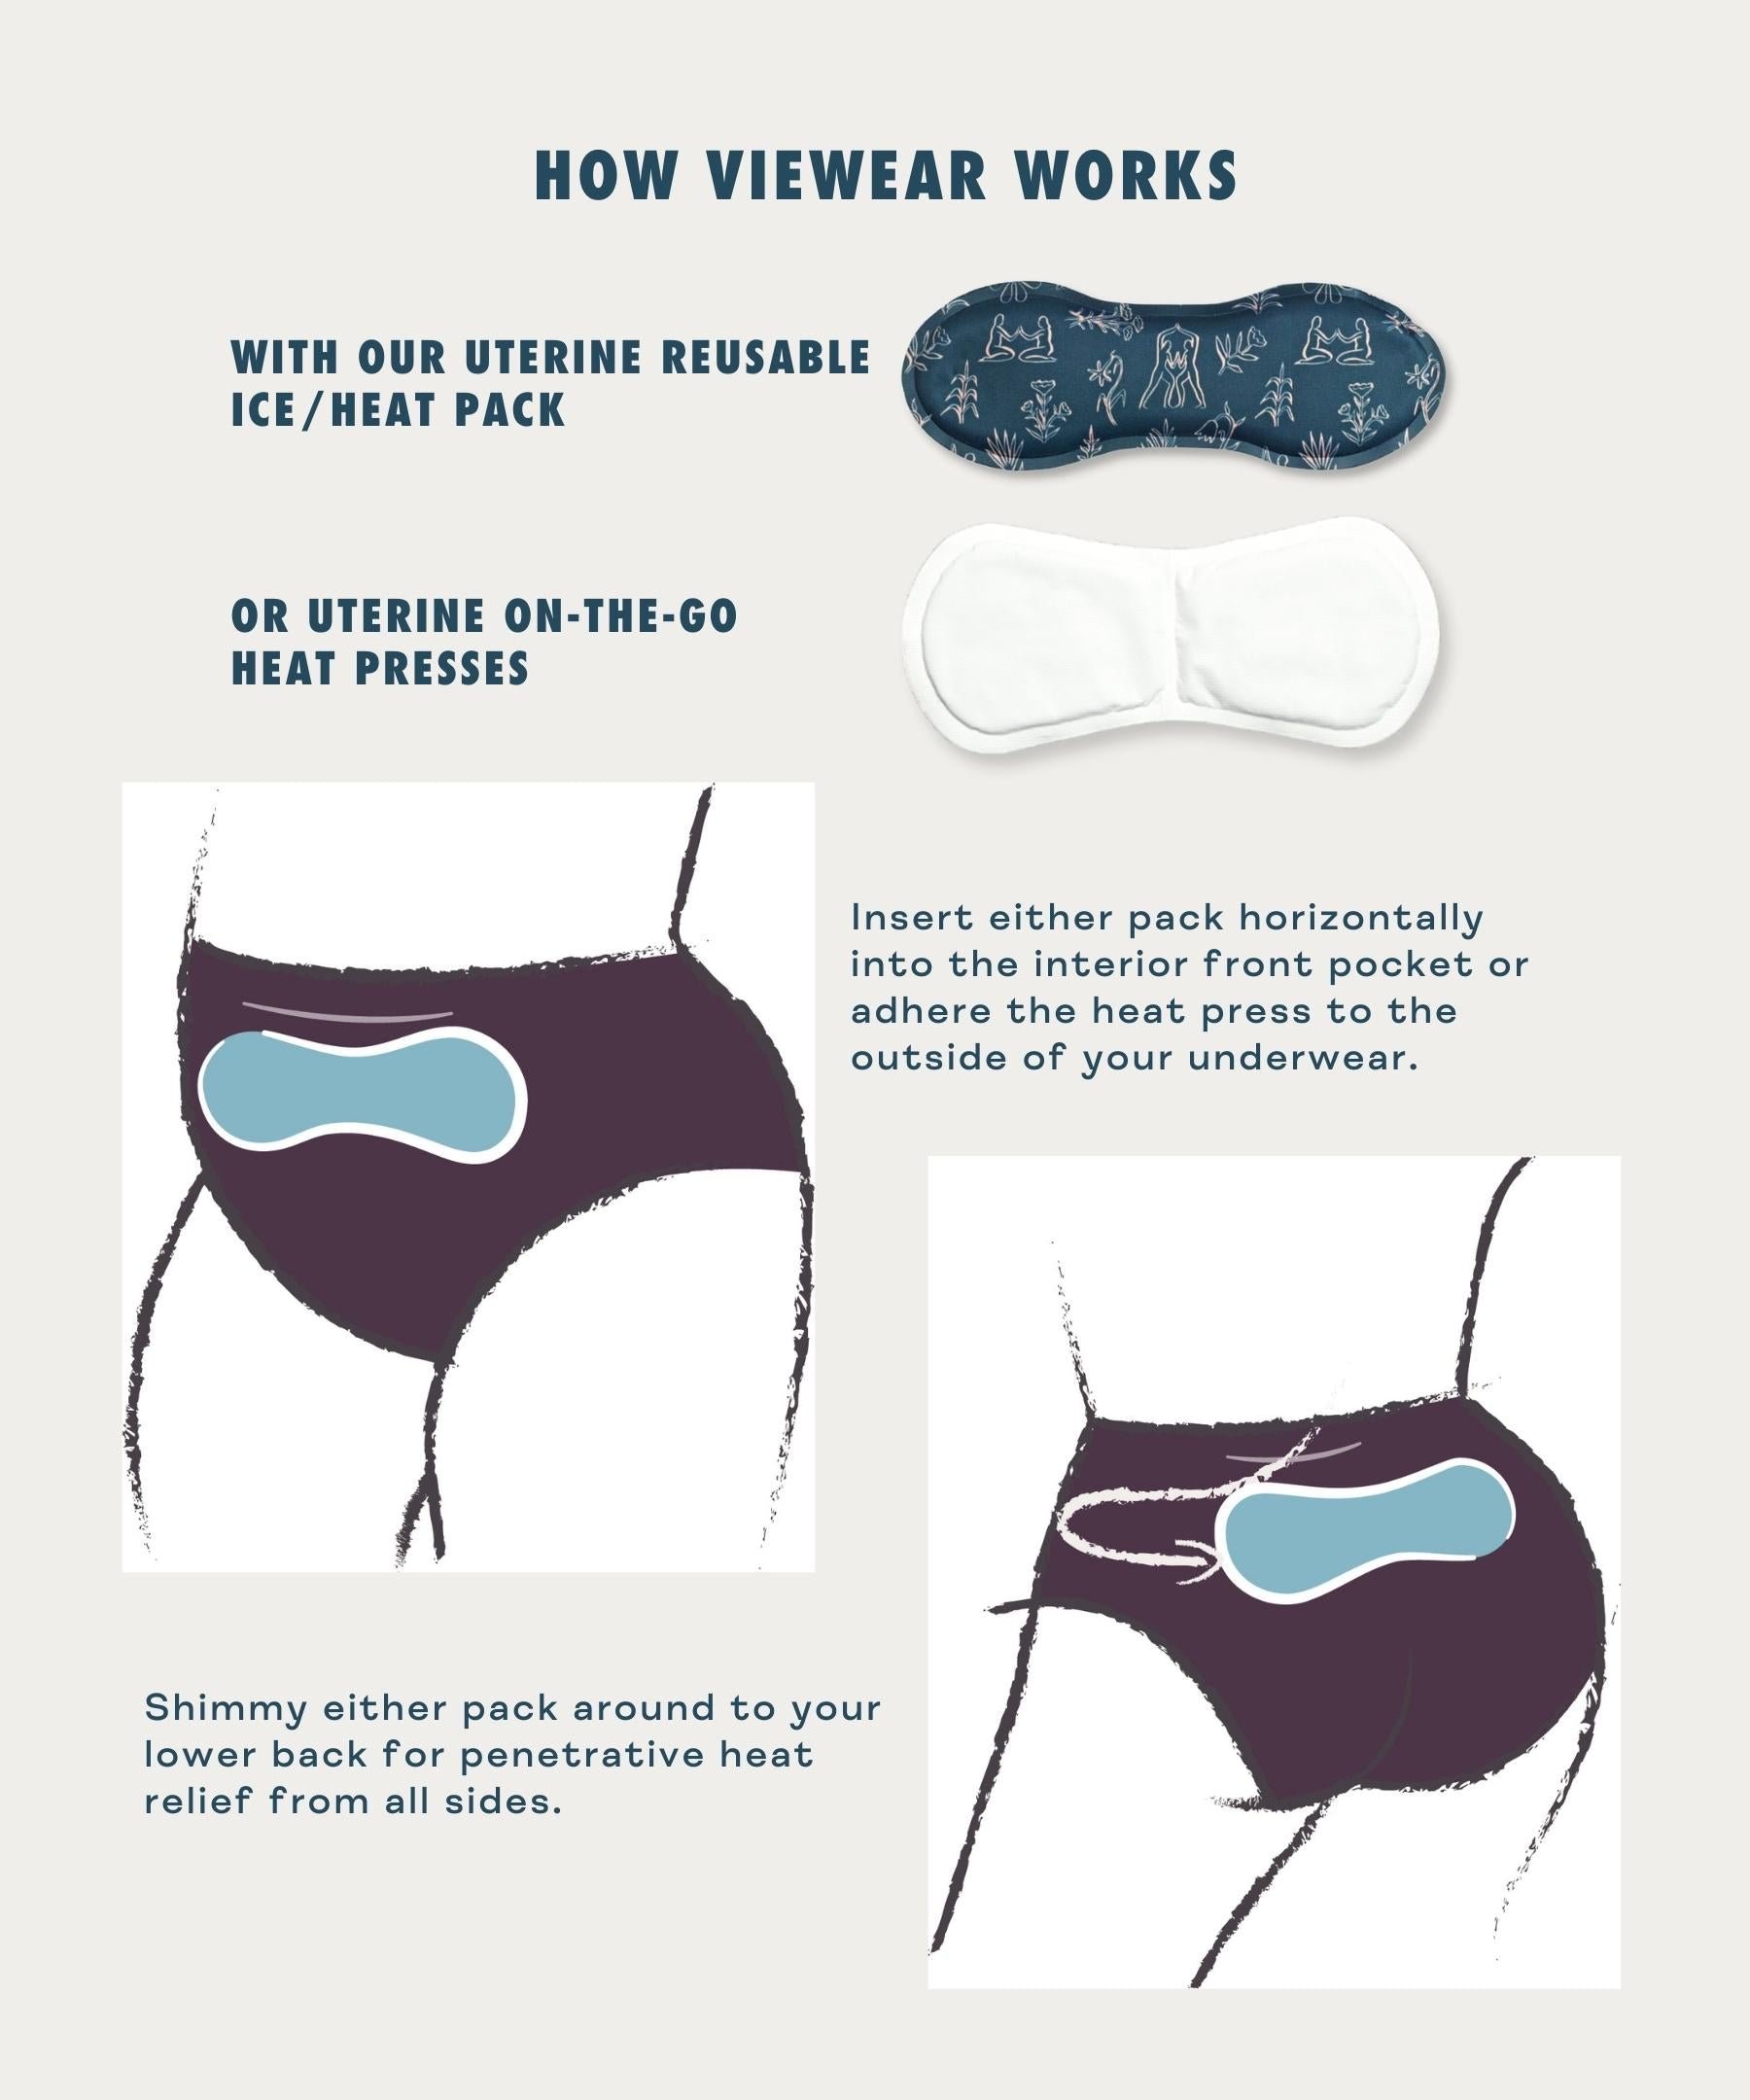 How VieWear Works Infographic